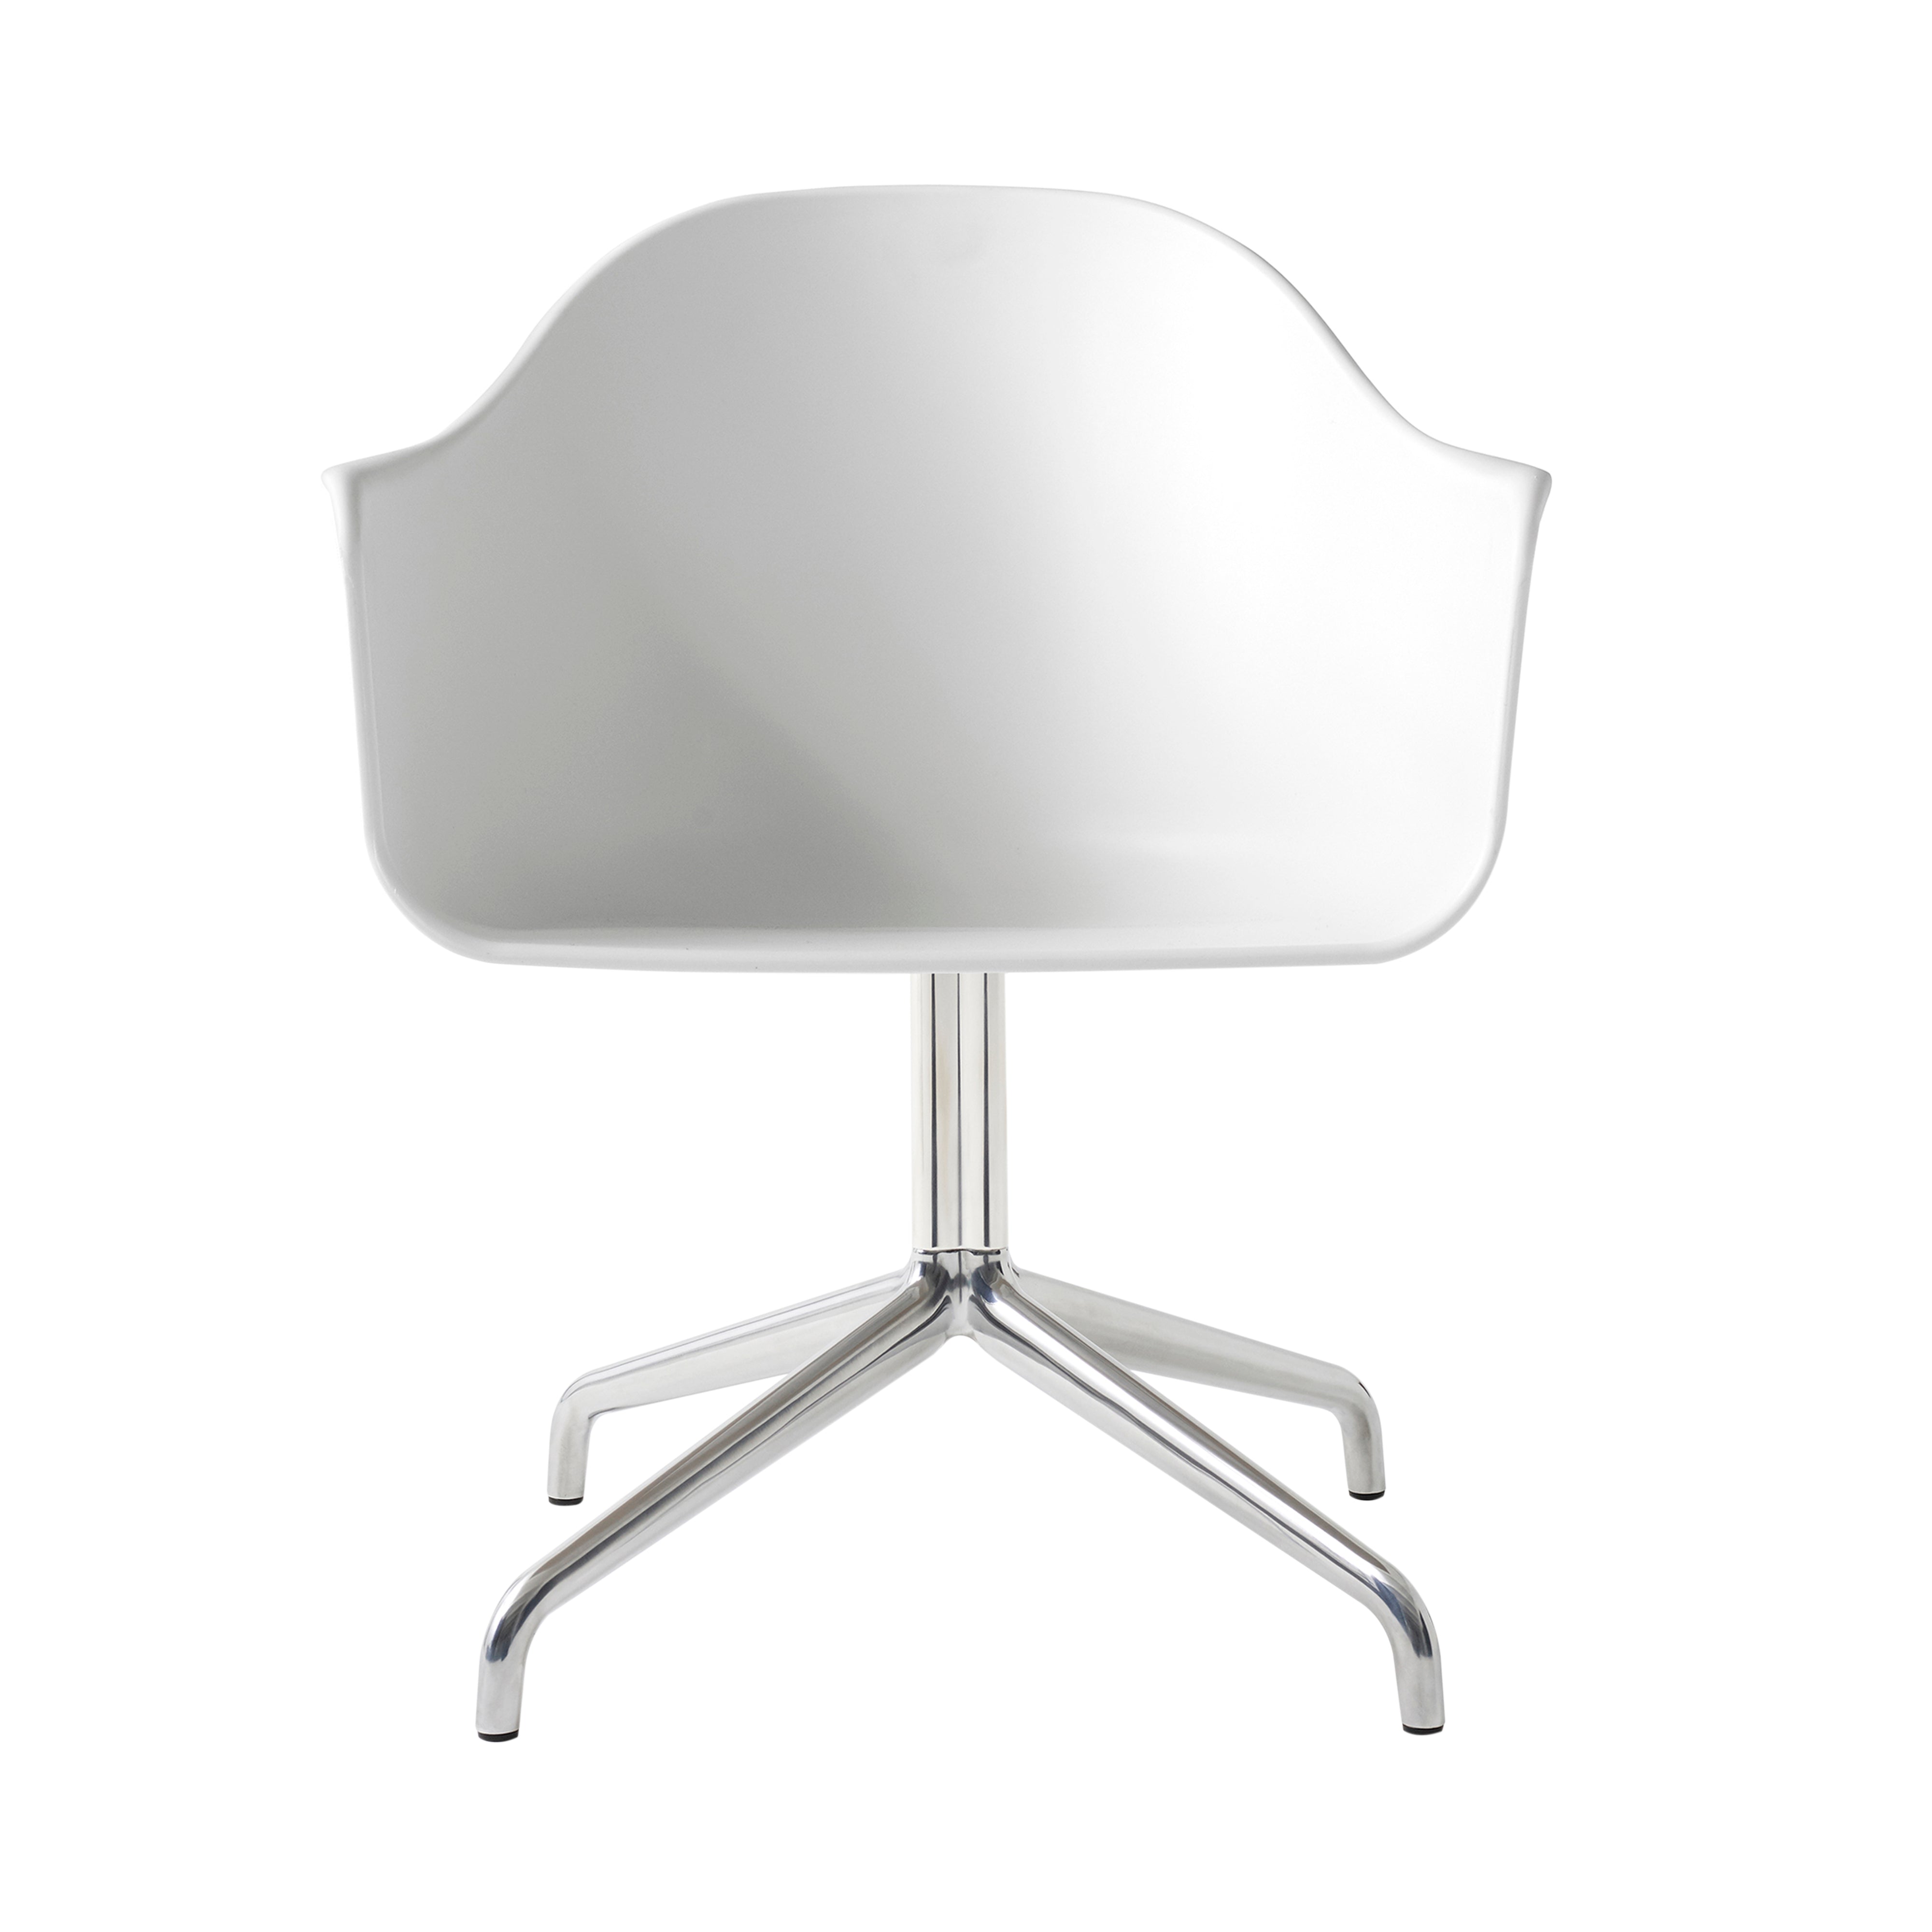 Harbour Dining Chair: Star Base + Return + Polished Aluminum + White